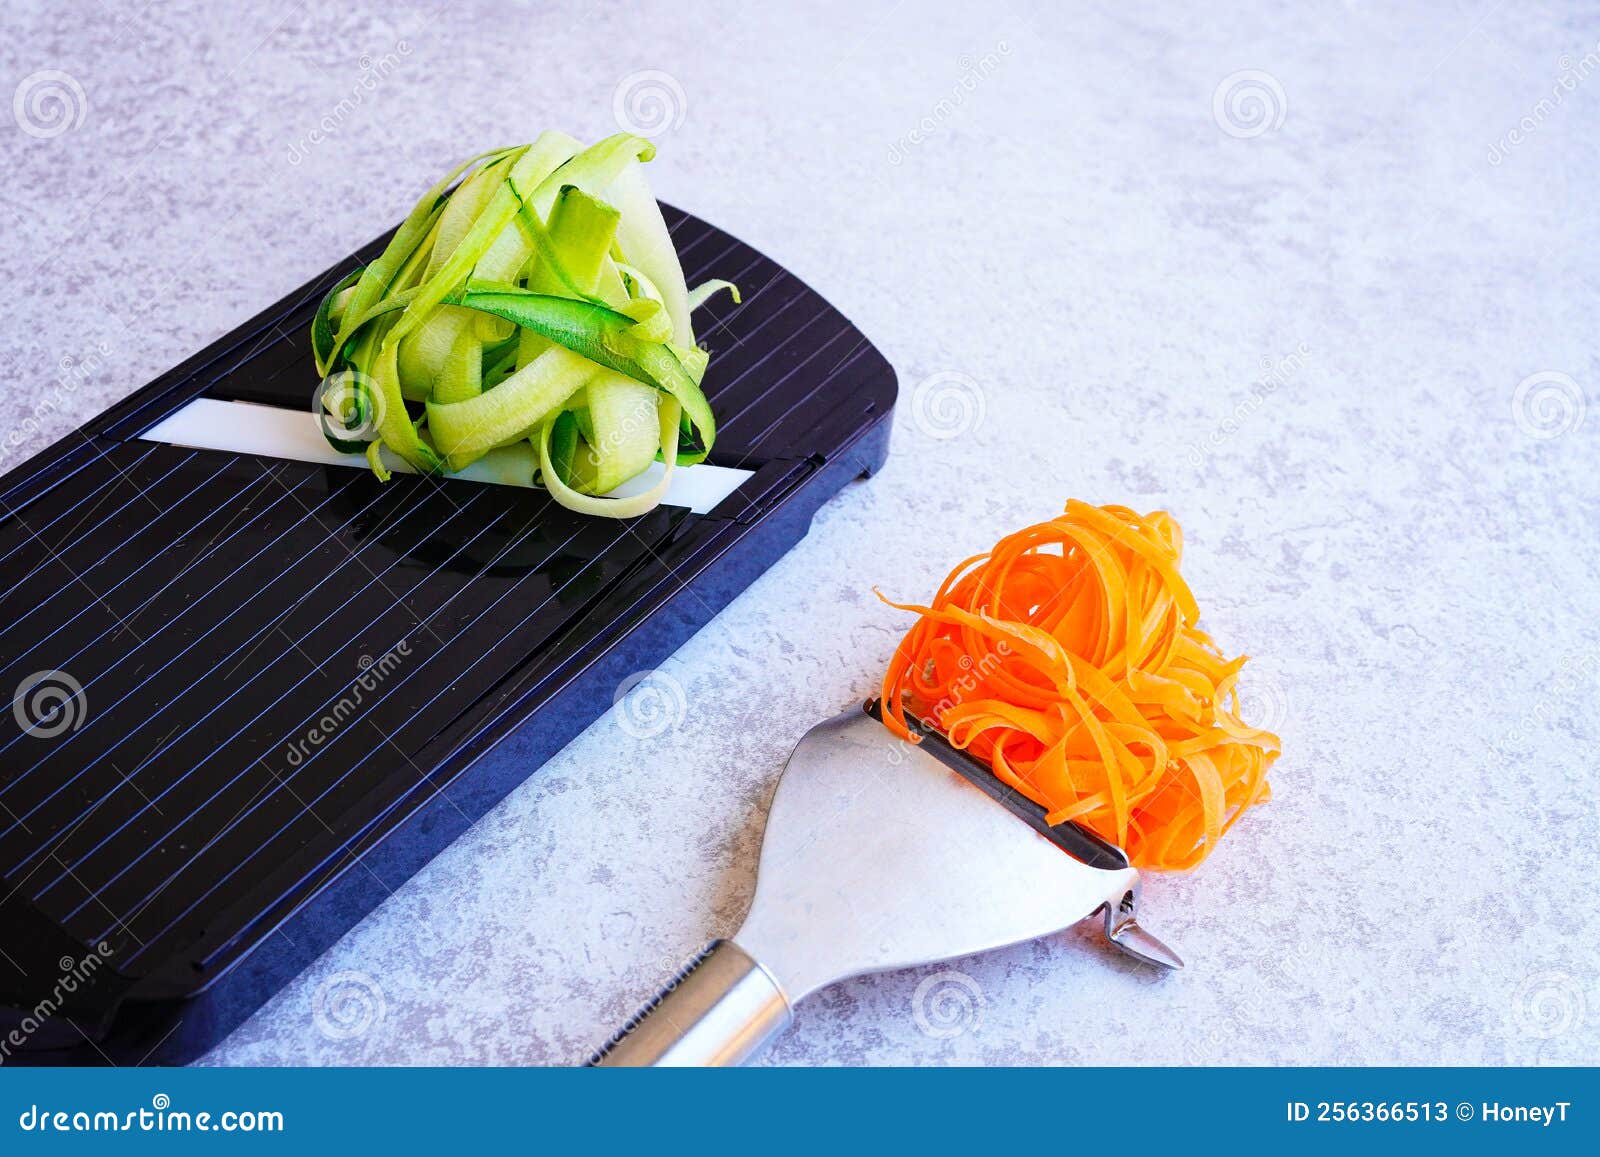 Closeup of Vegetable Slicer with Zucchini and Peeler with Carrot